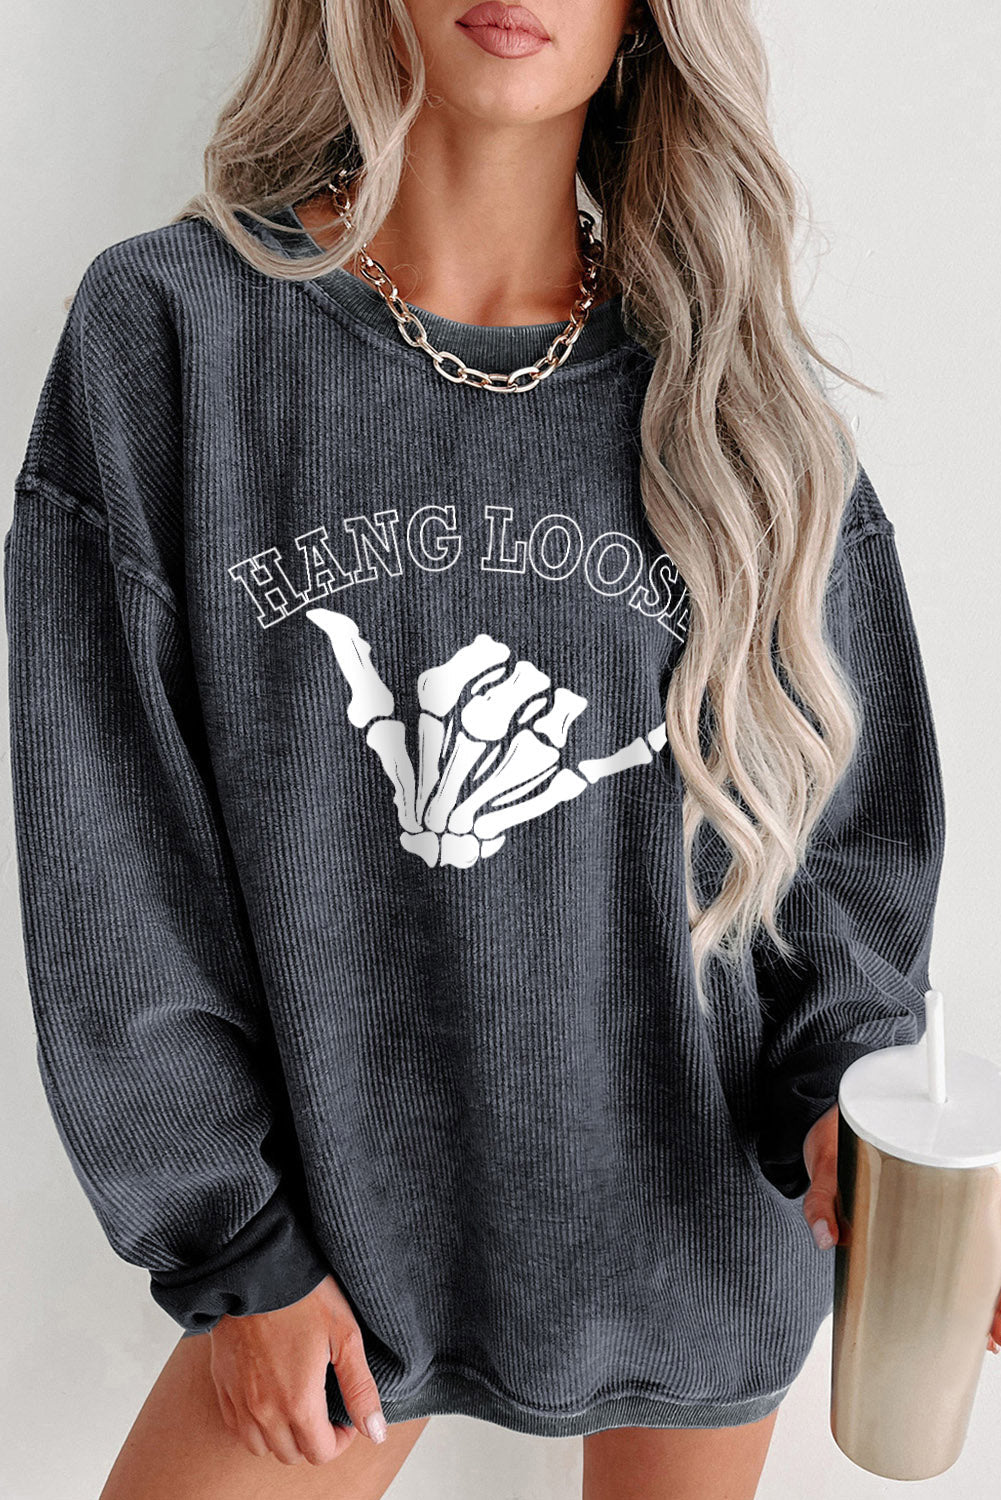 Skeleton Hand Graphic Sweatshirt Charcoal S CLOTHING, SHOES & ACCESSORIES by Trendsi | BlingxAddict